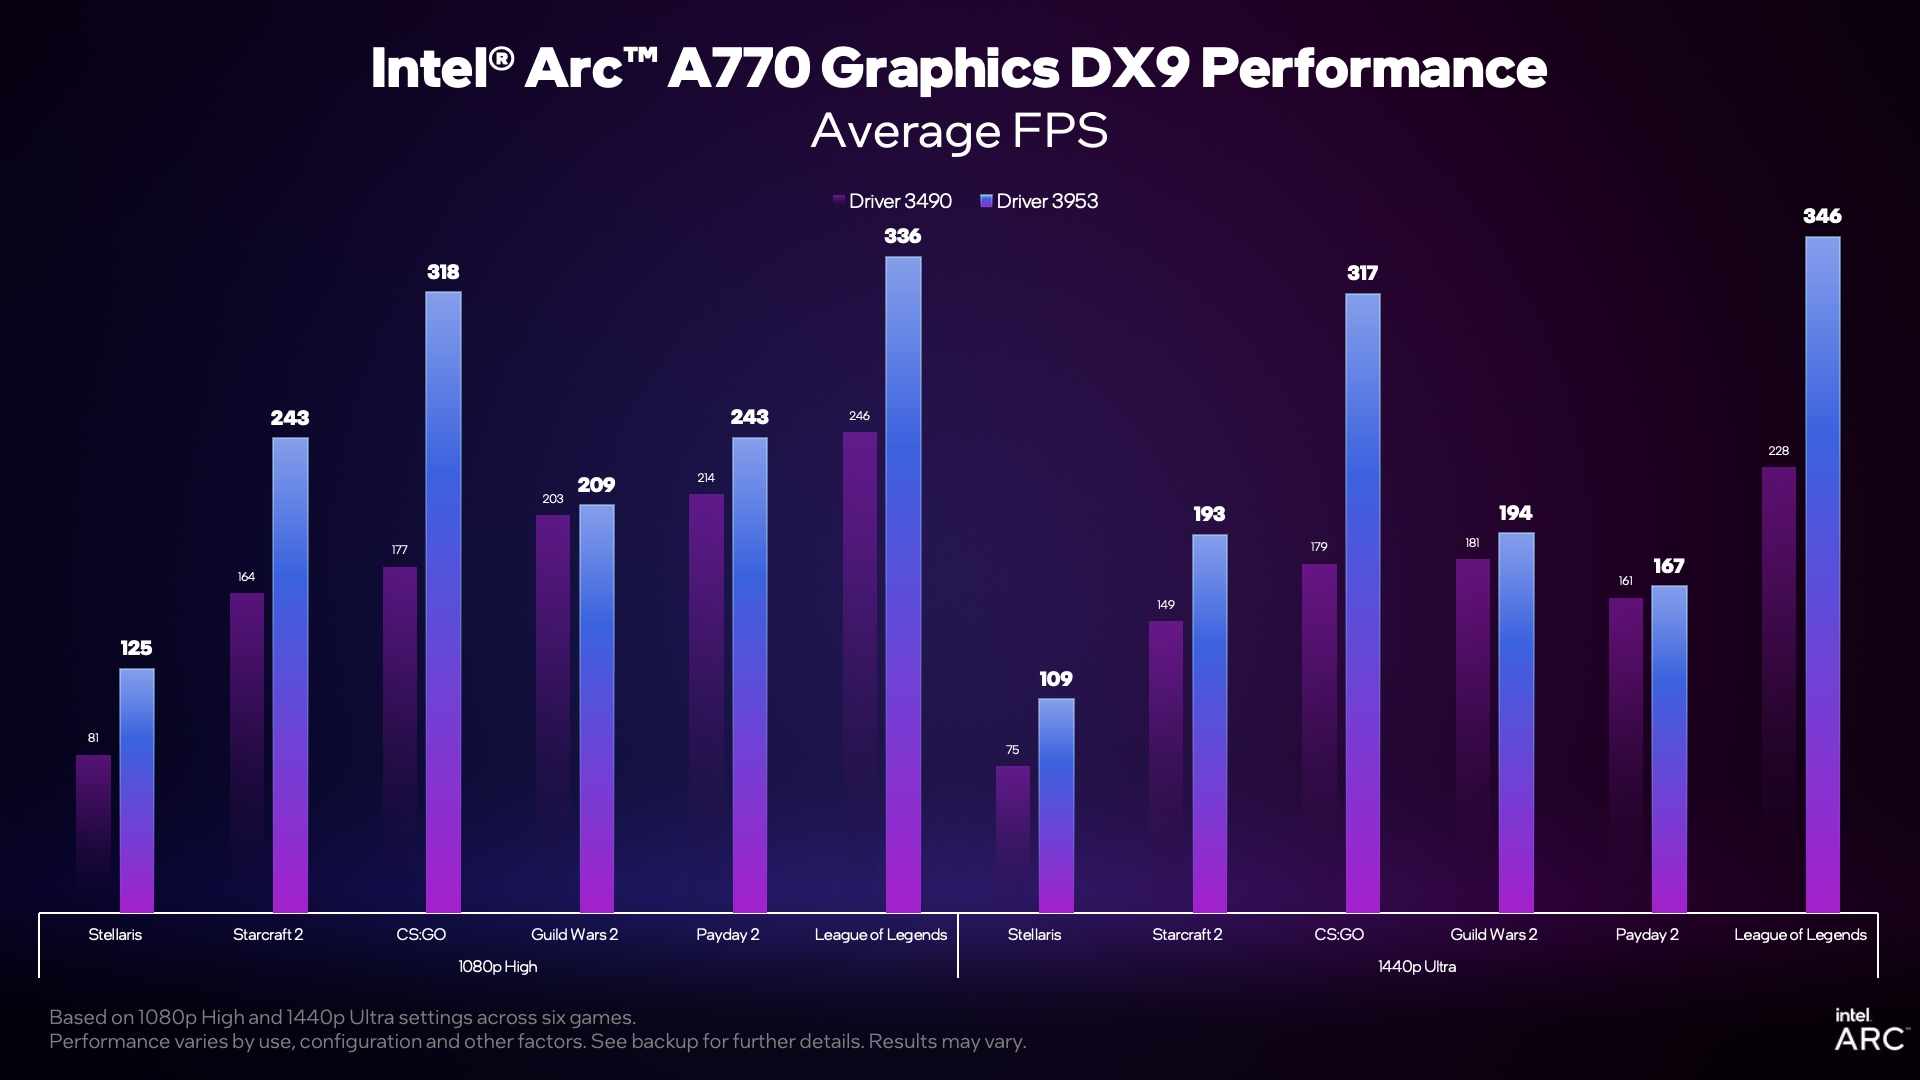 Intel's v3959 driver showing FPS performance improvements across several games.